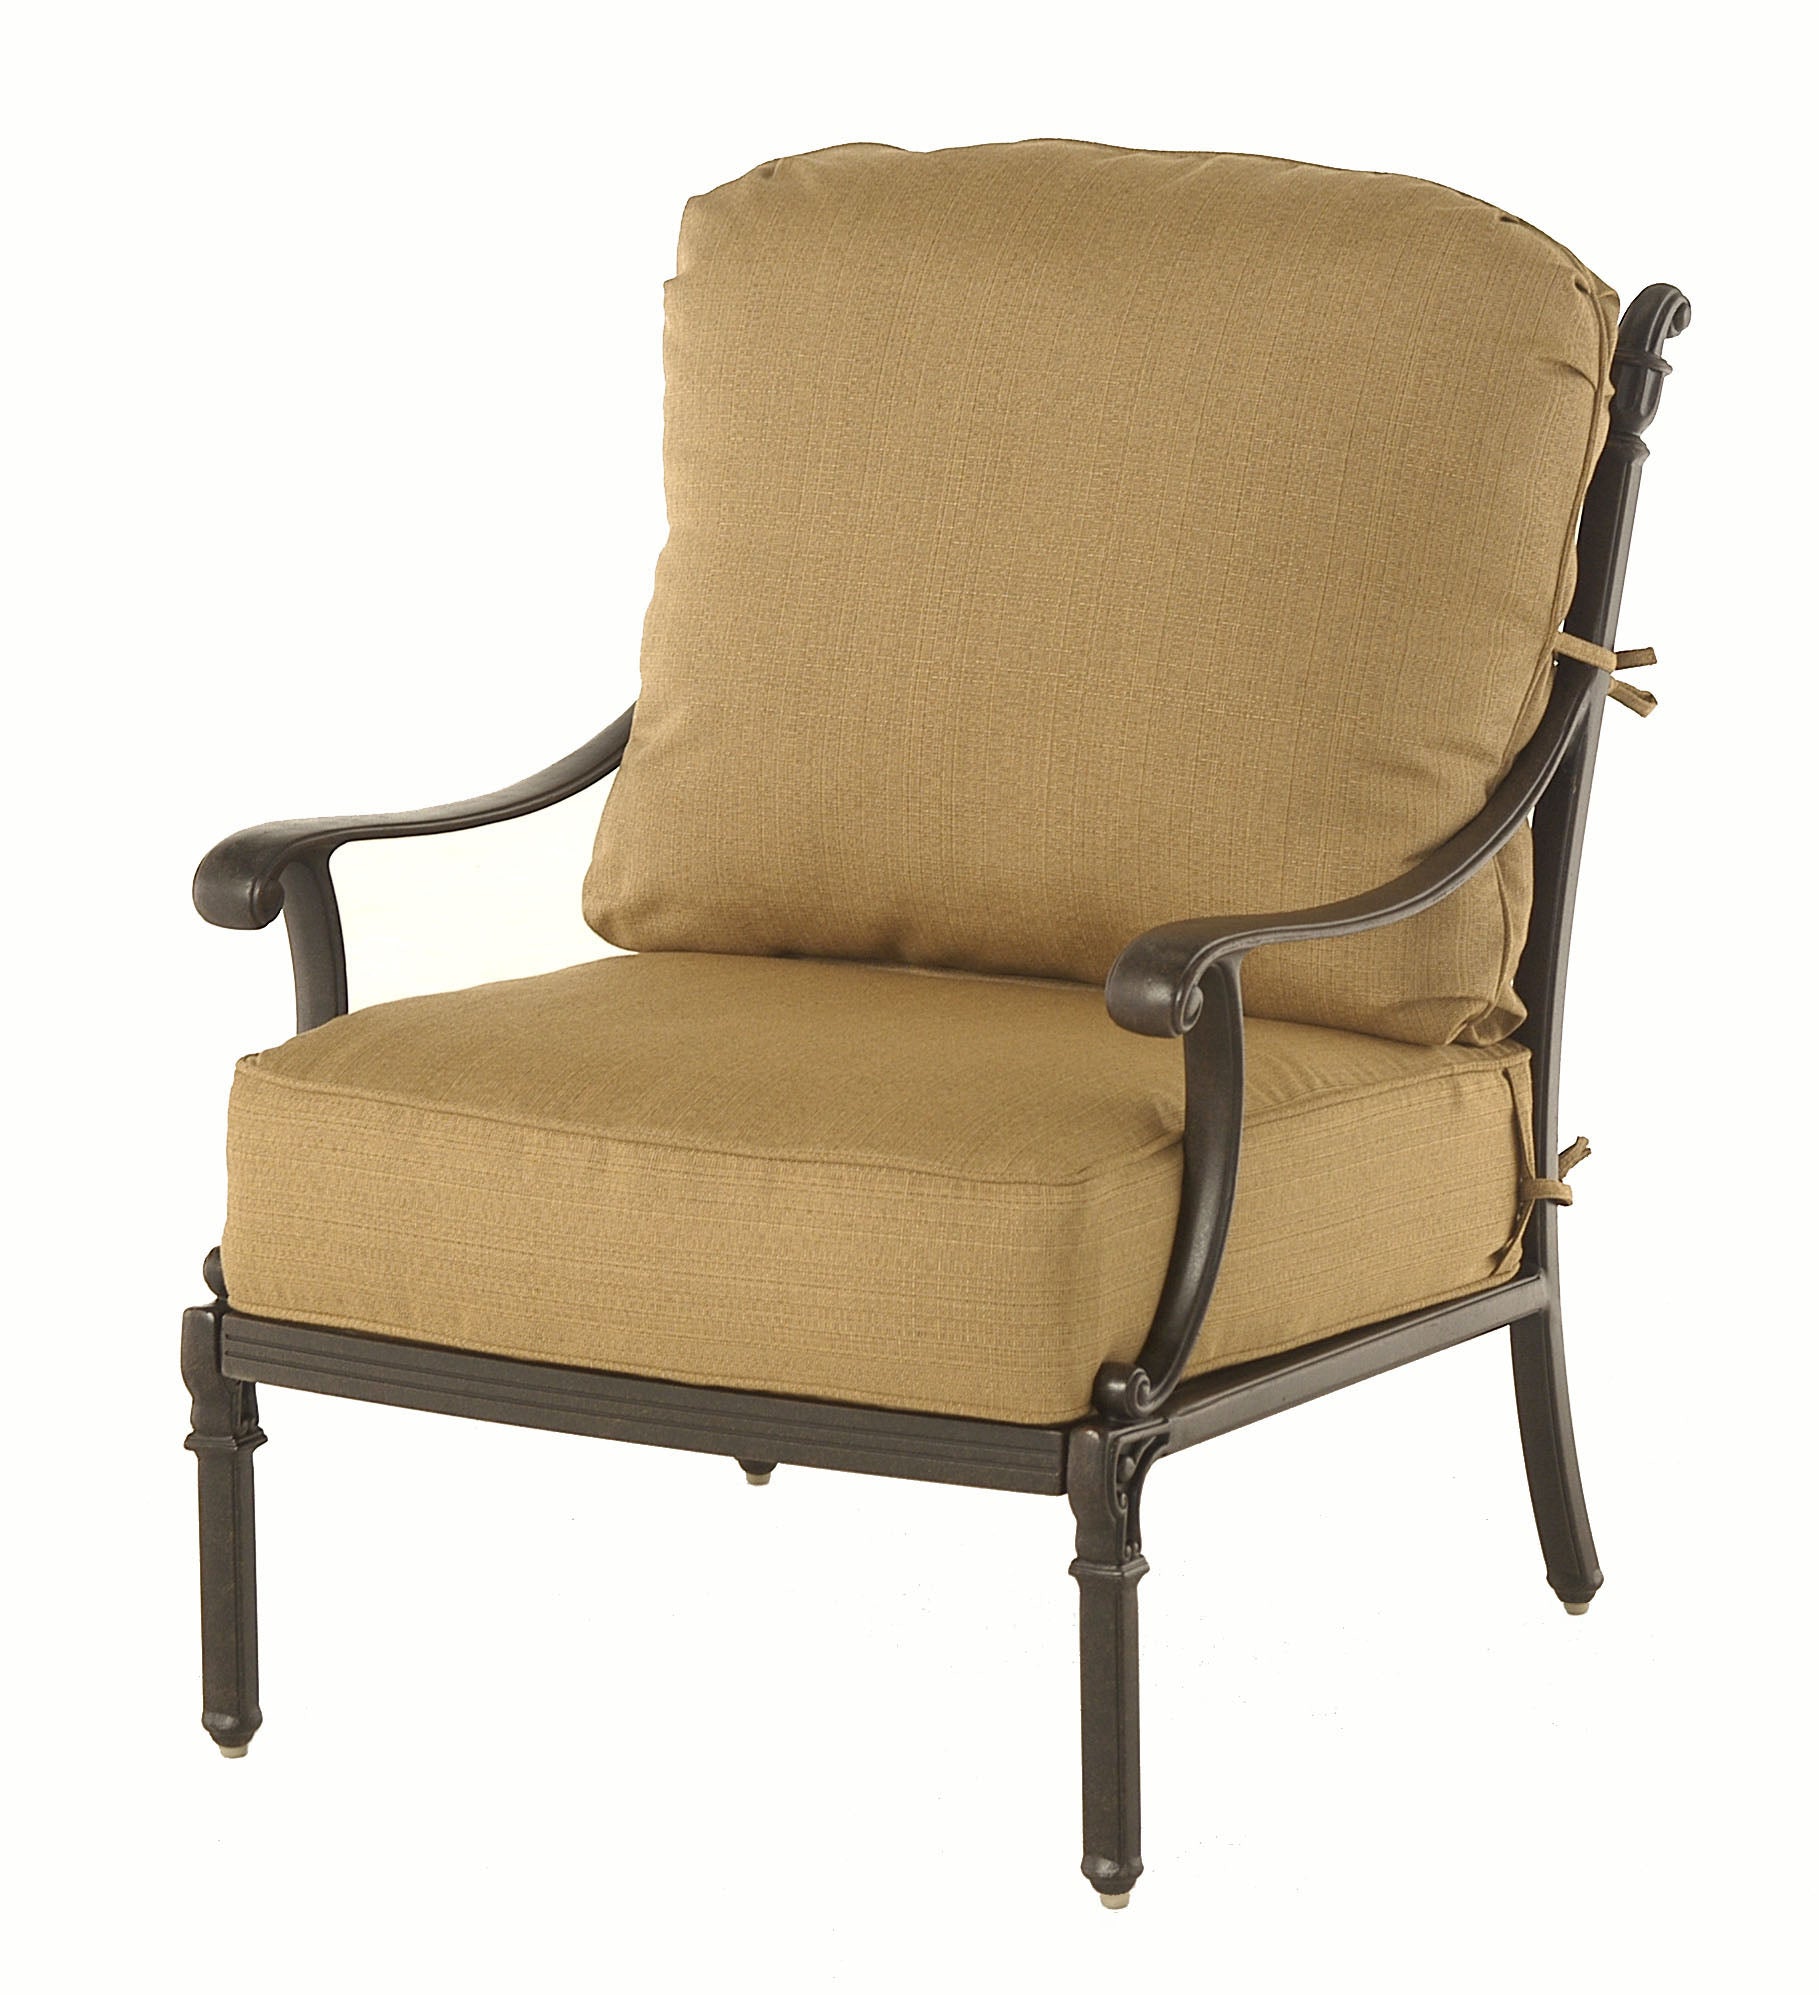 Grand Tuscany Club Chair with Cushion  by Hanamint